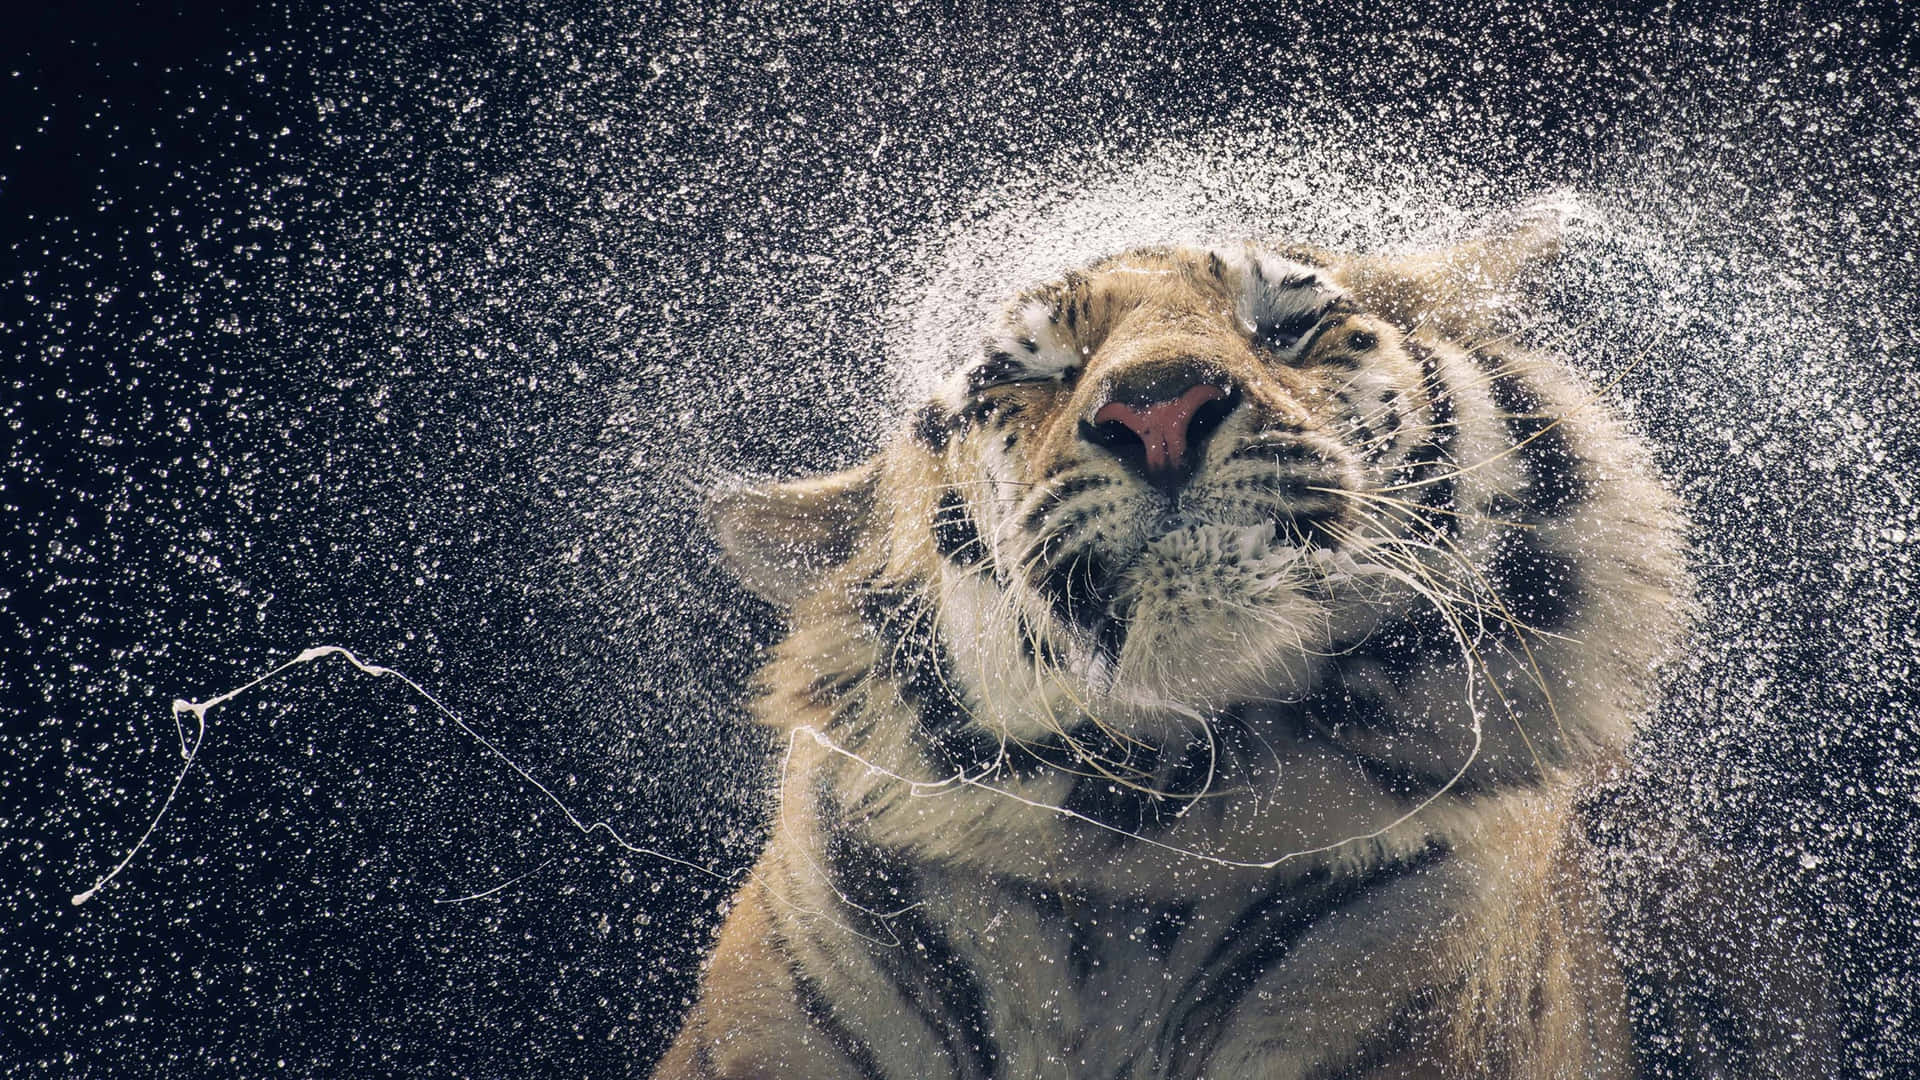 A Tiger Is Being Sprayed With Water Background